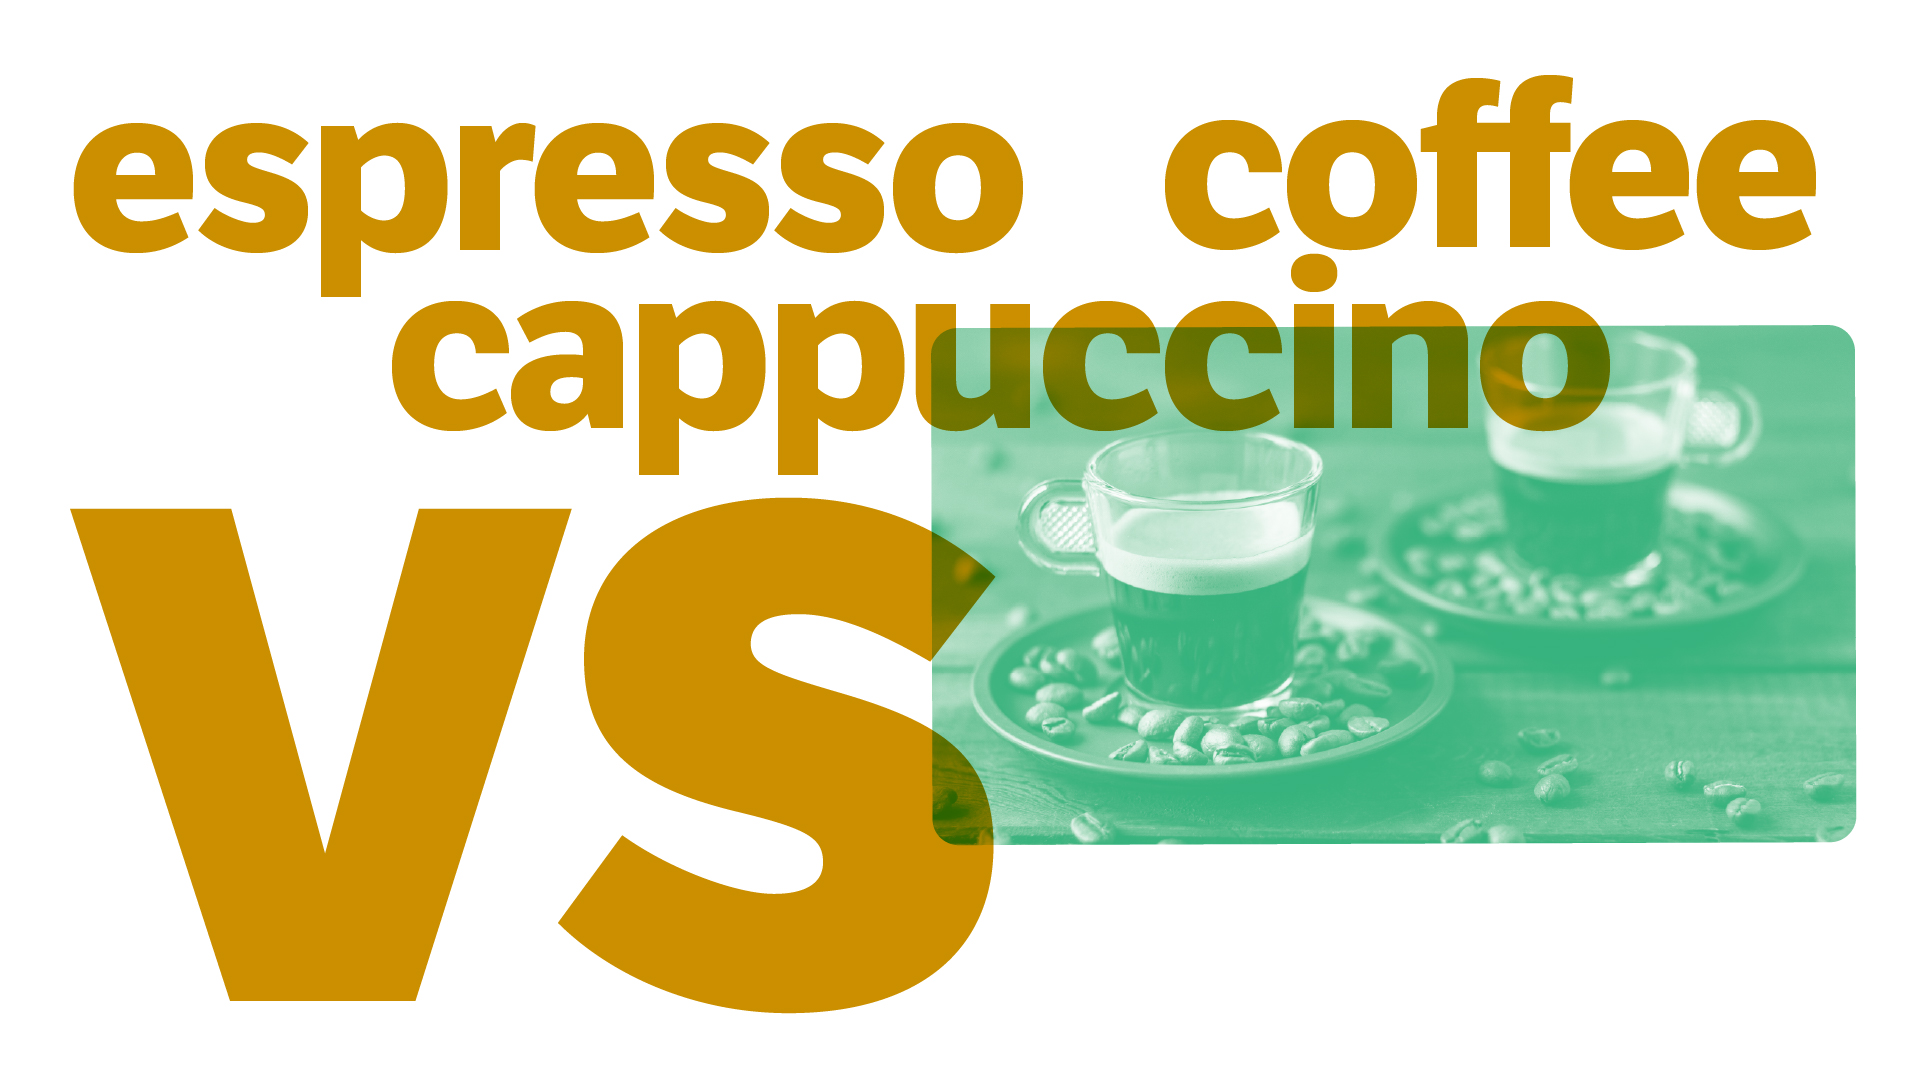 Espresso coffee is unhealthier for men than for women